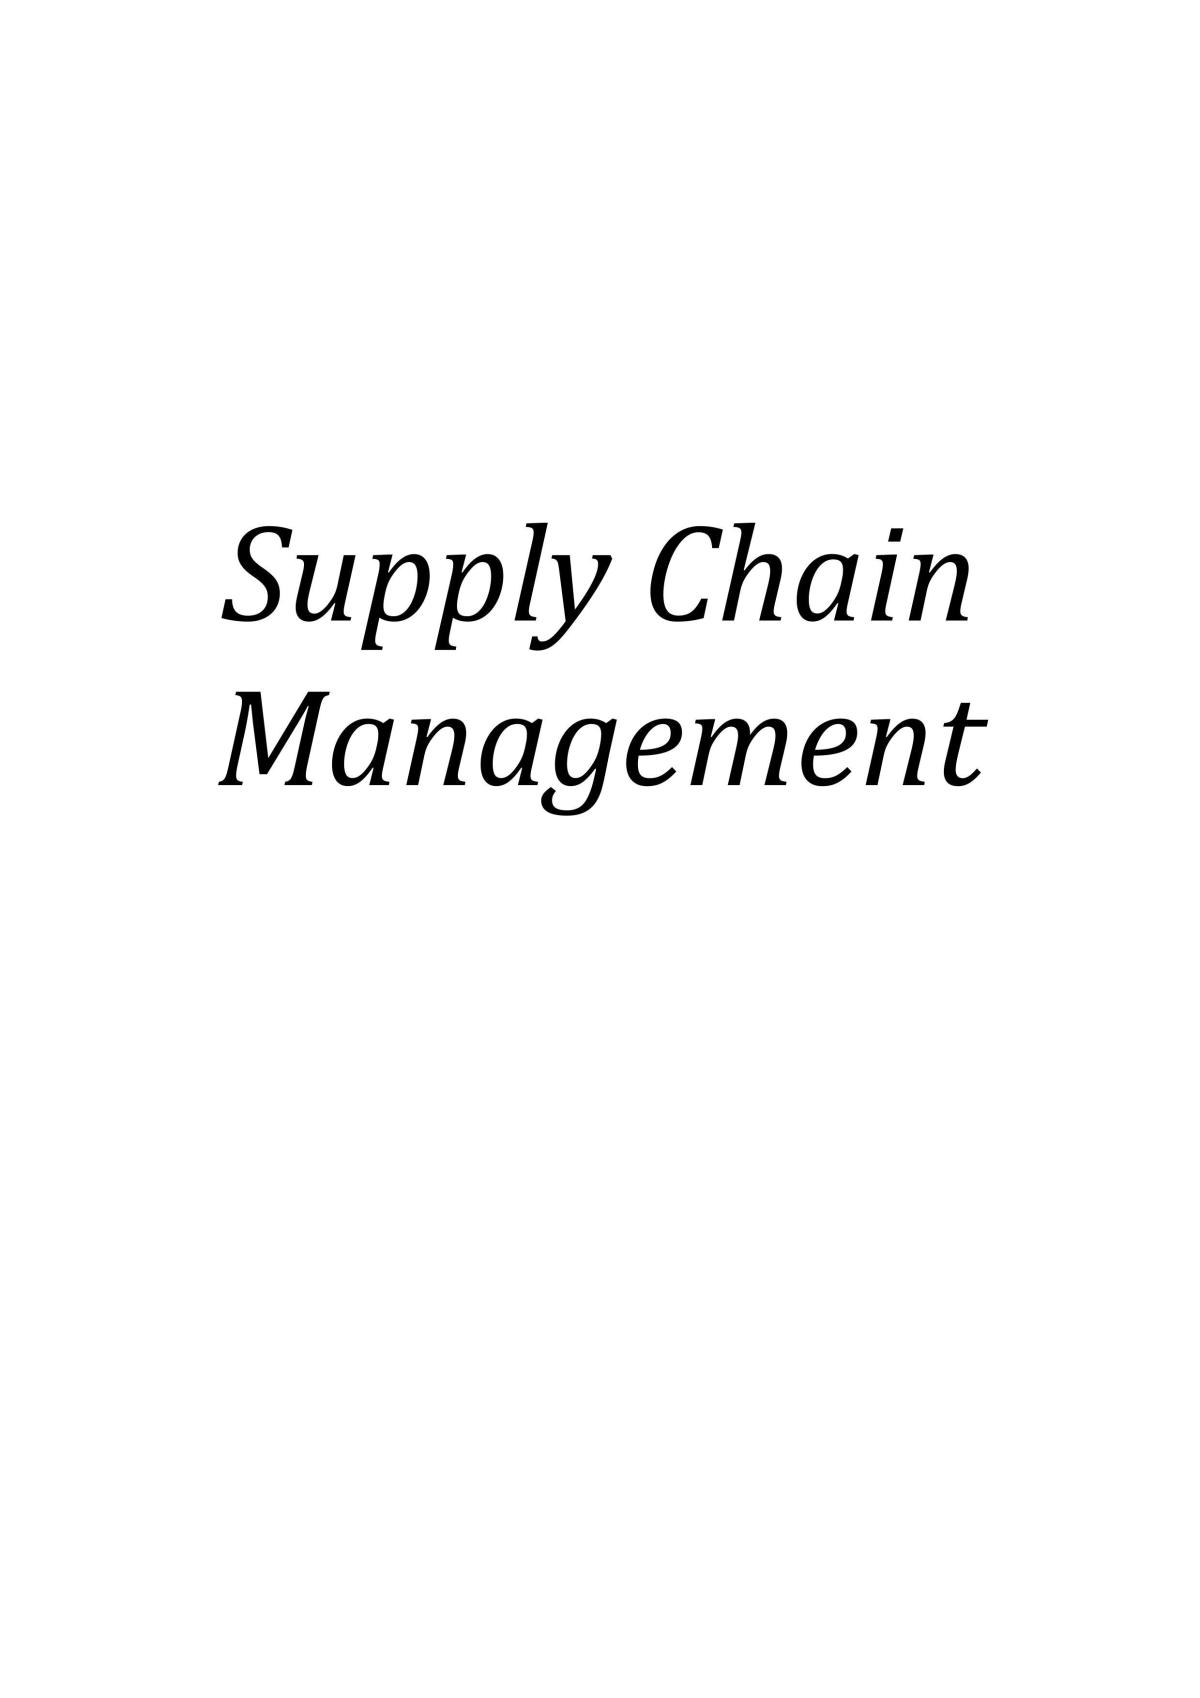 Supply Chain Management Summary - Page 1